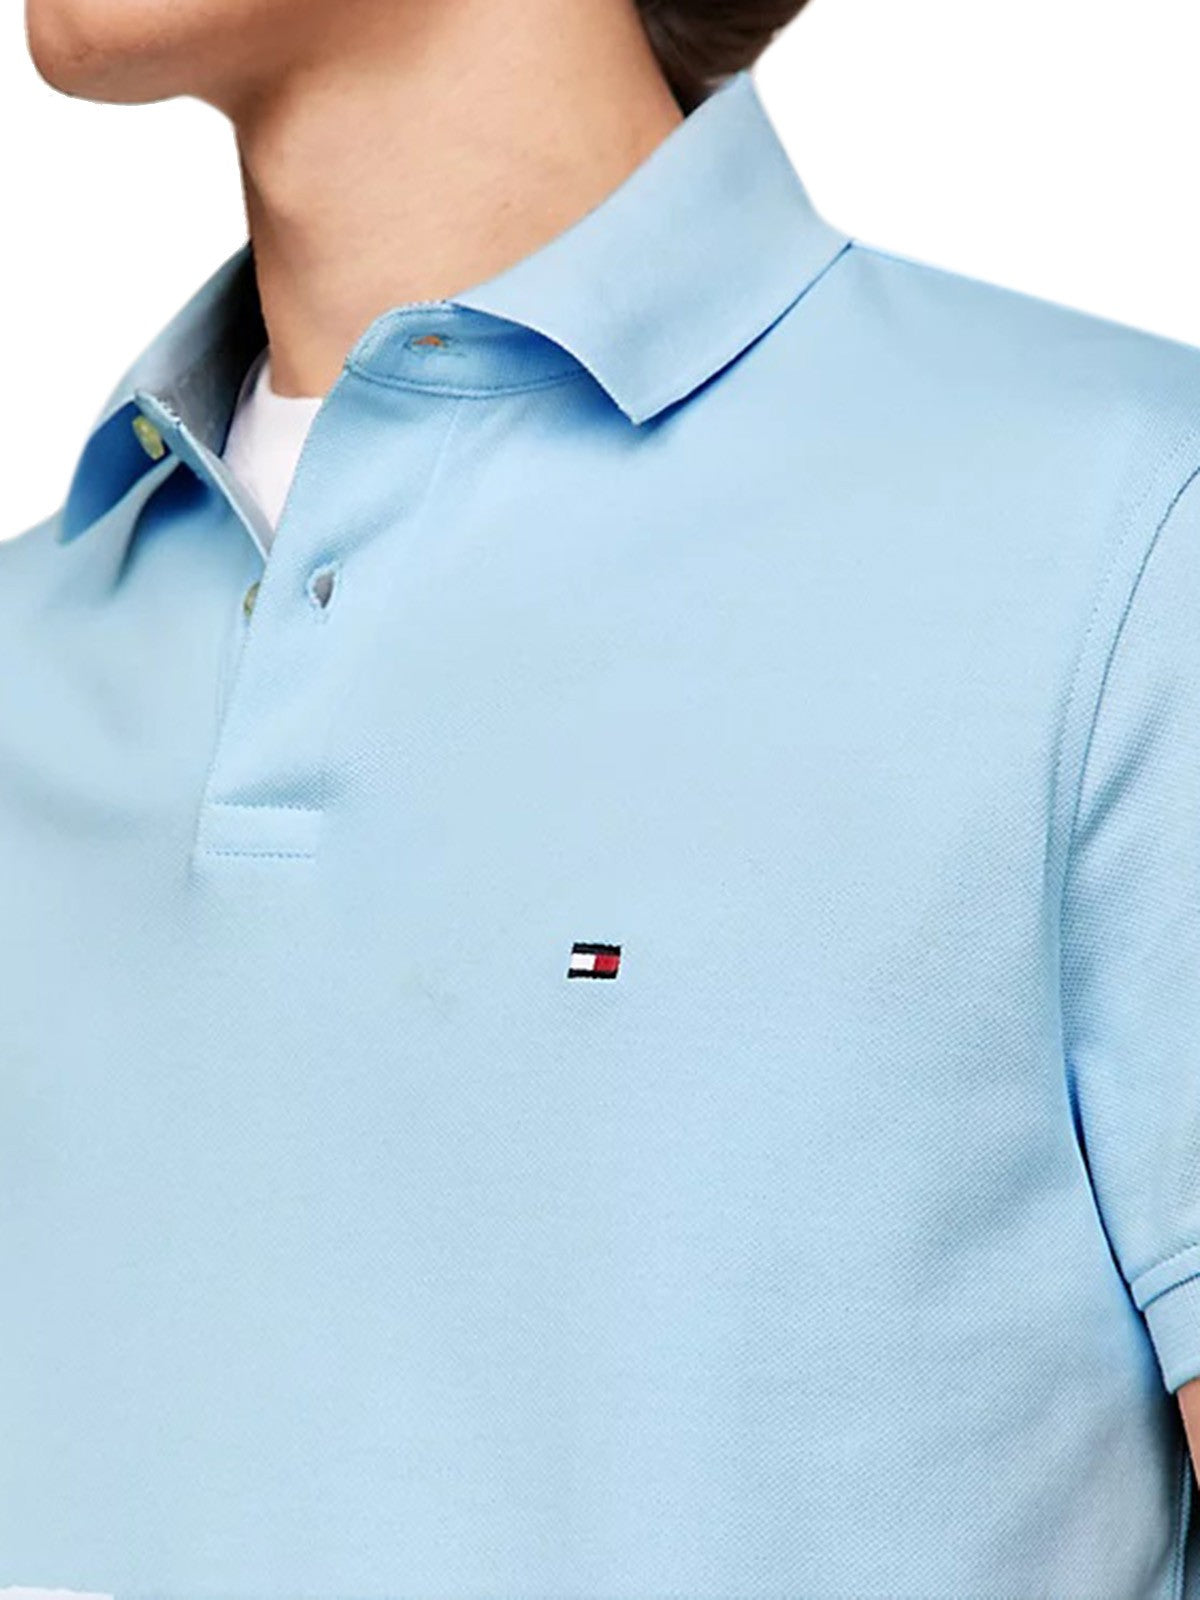 Polo Uomo Tommy Hilfiger - Polo 1985 Collection Regular Fit - Celeste